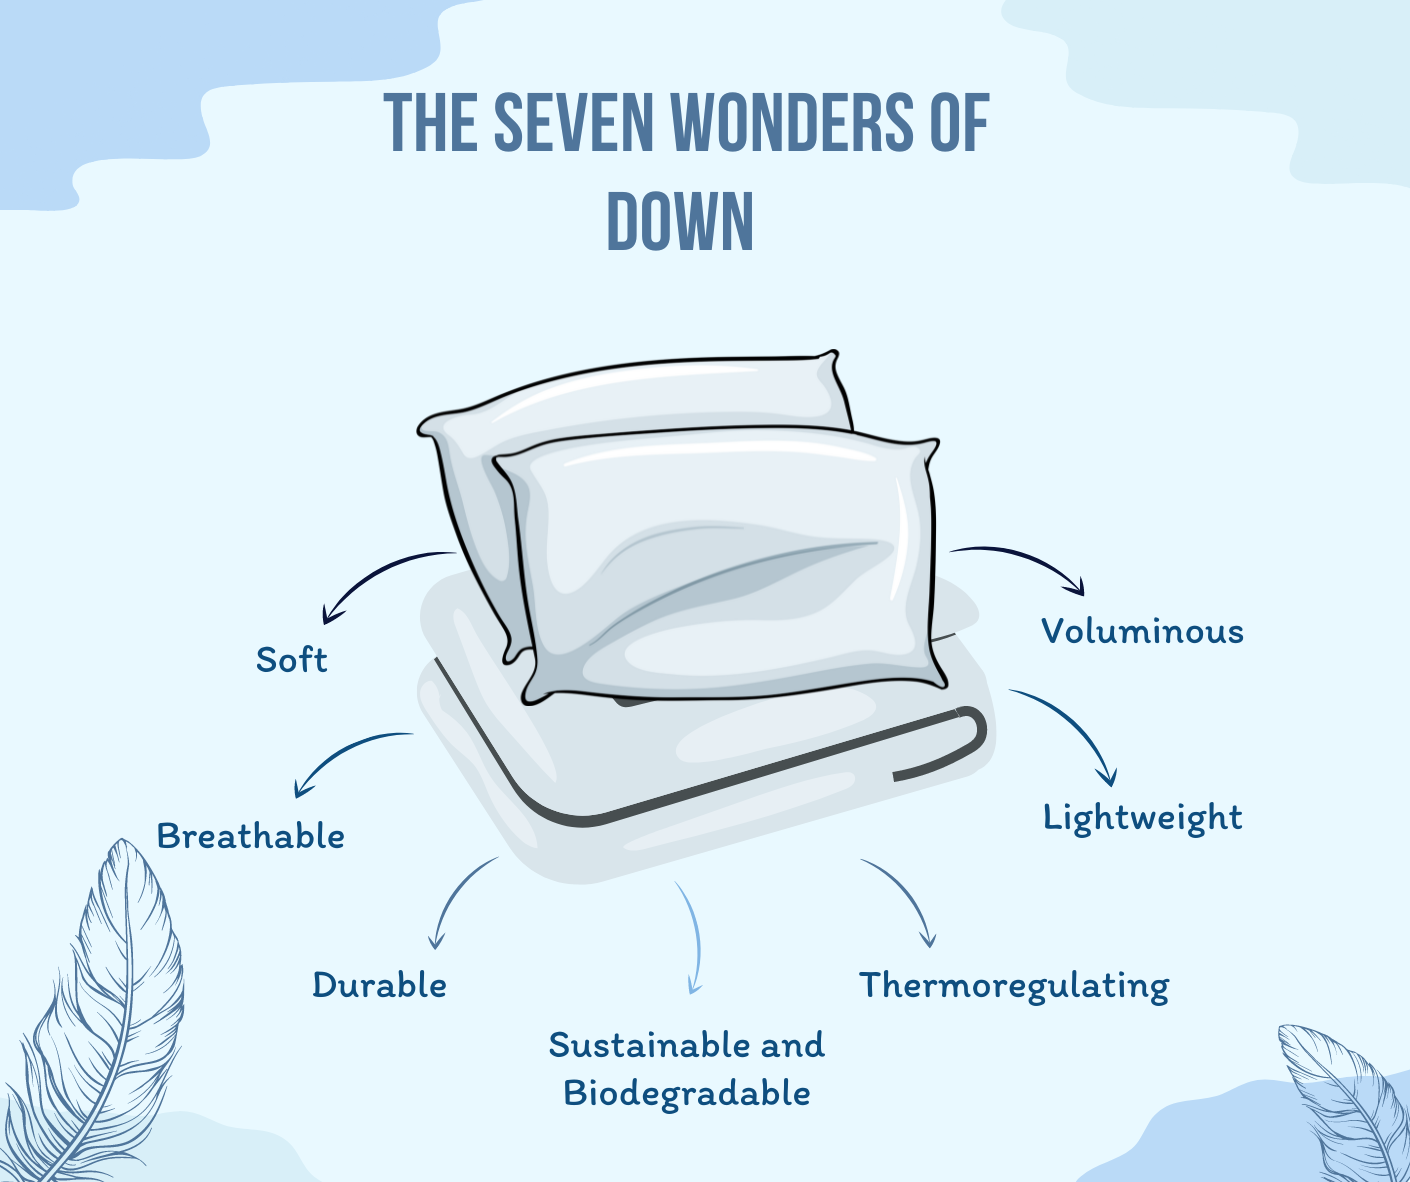 Seven wonders of down illustration that shows the main seven benefits of down